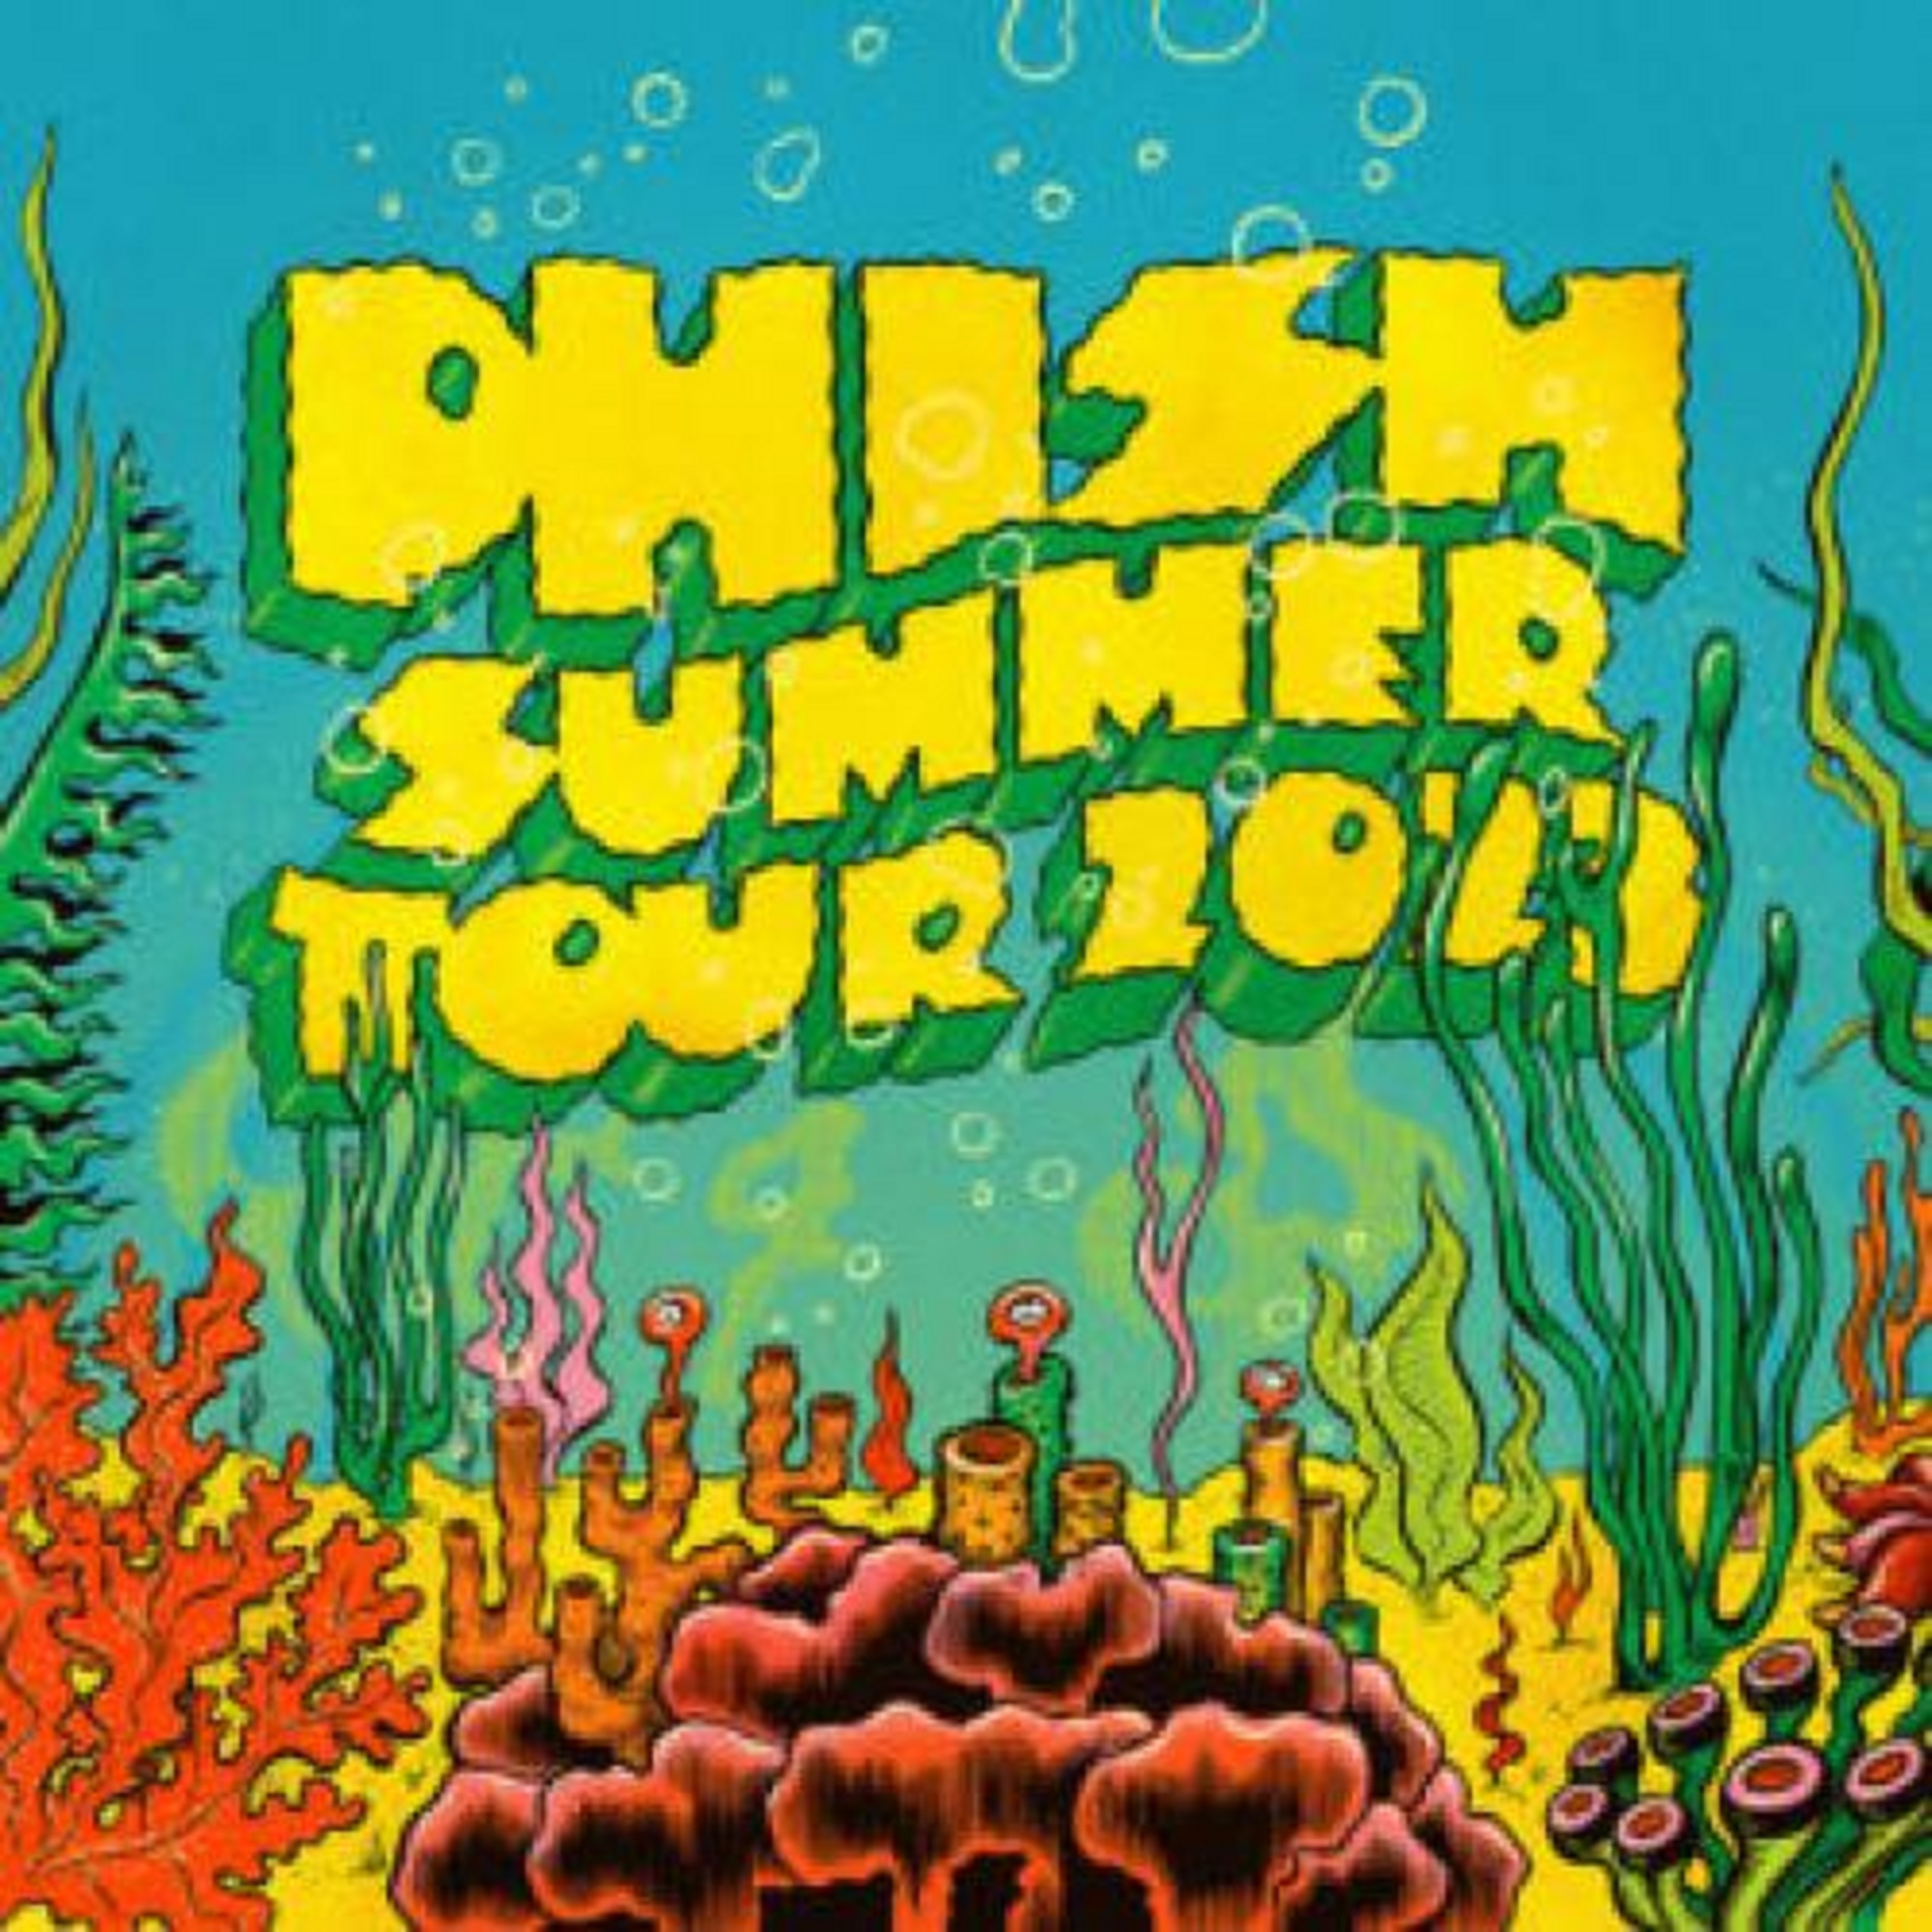  Phish 2023 Summer Tour Ticket Online Charity Auction Ends Monday, May 1